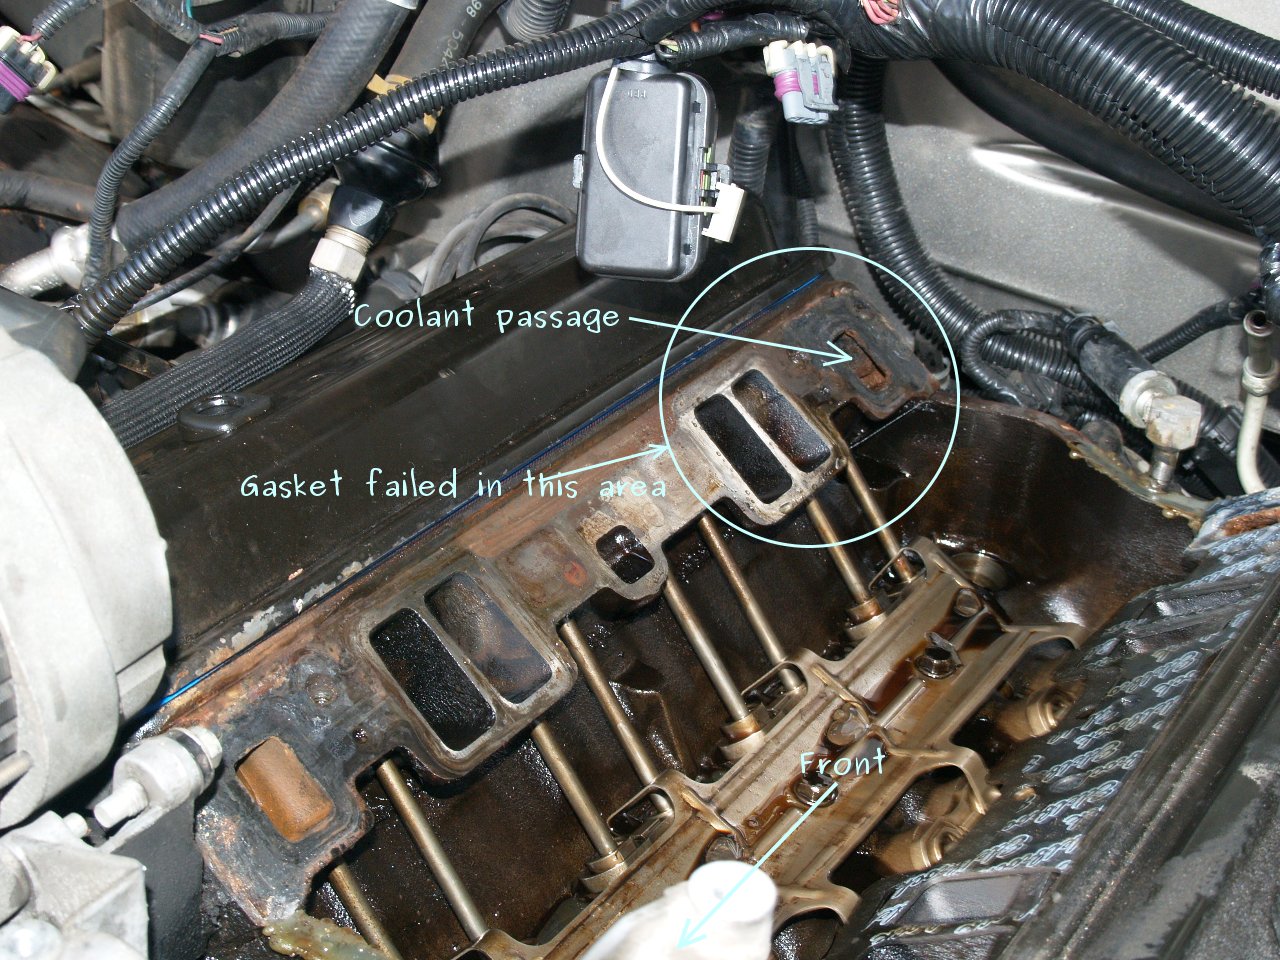 See P0021 in engine